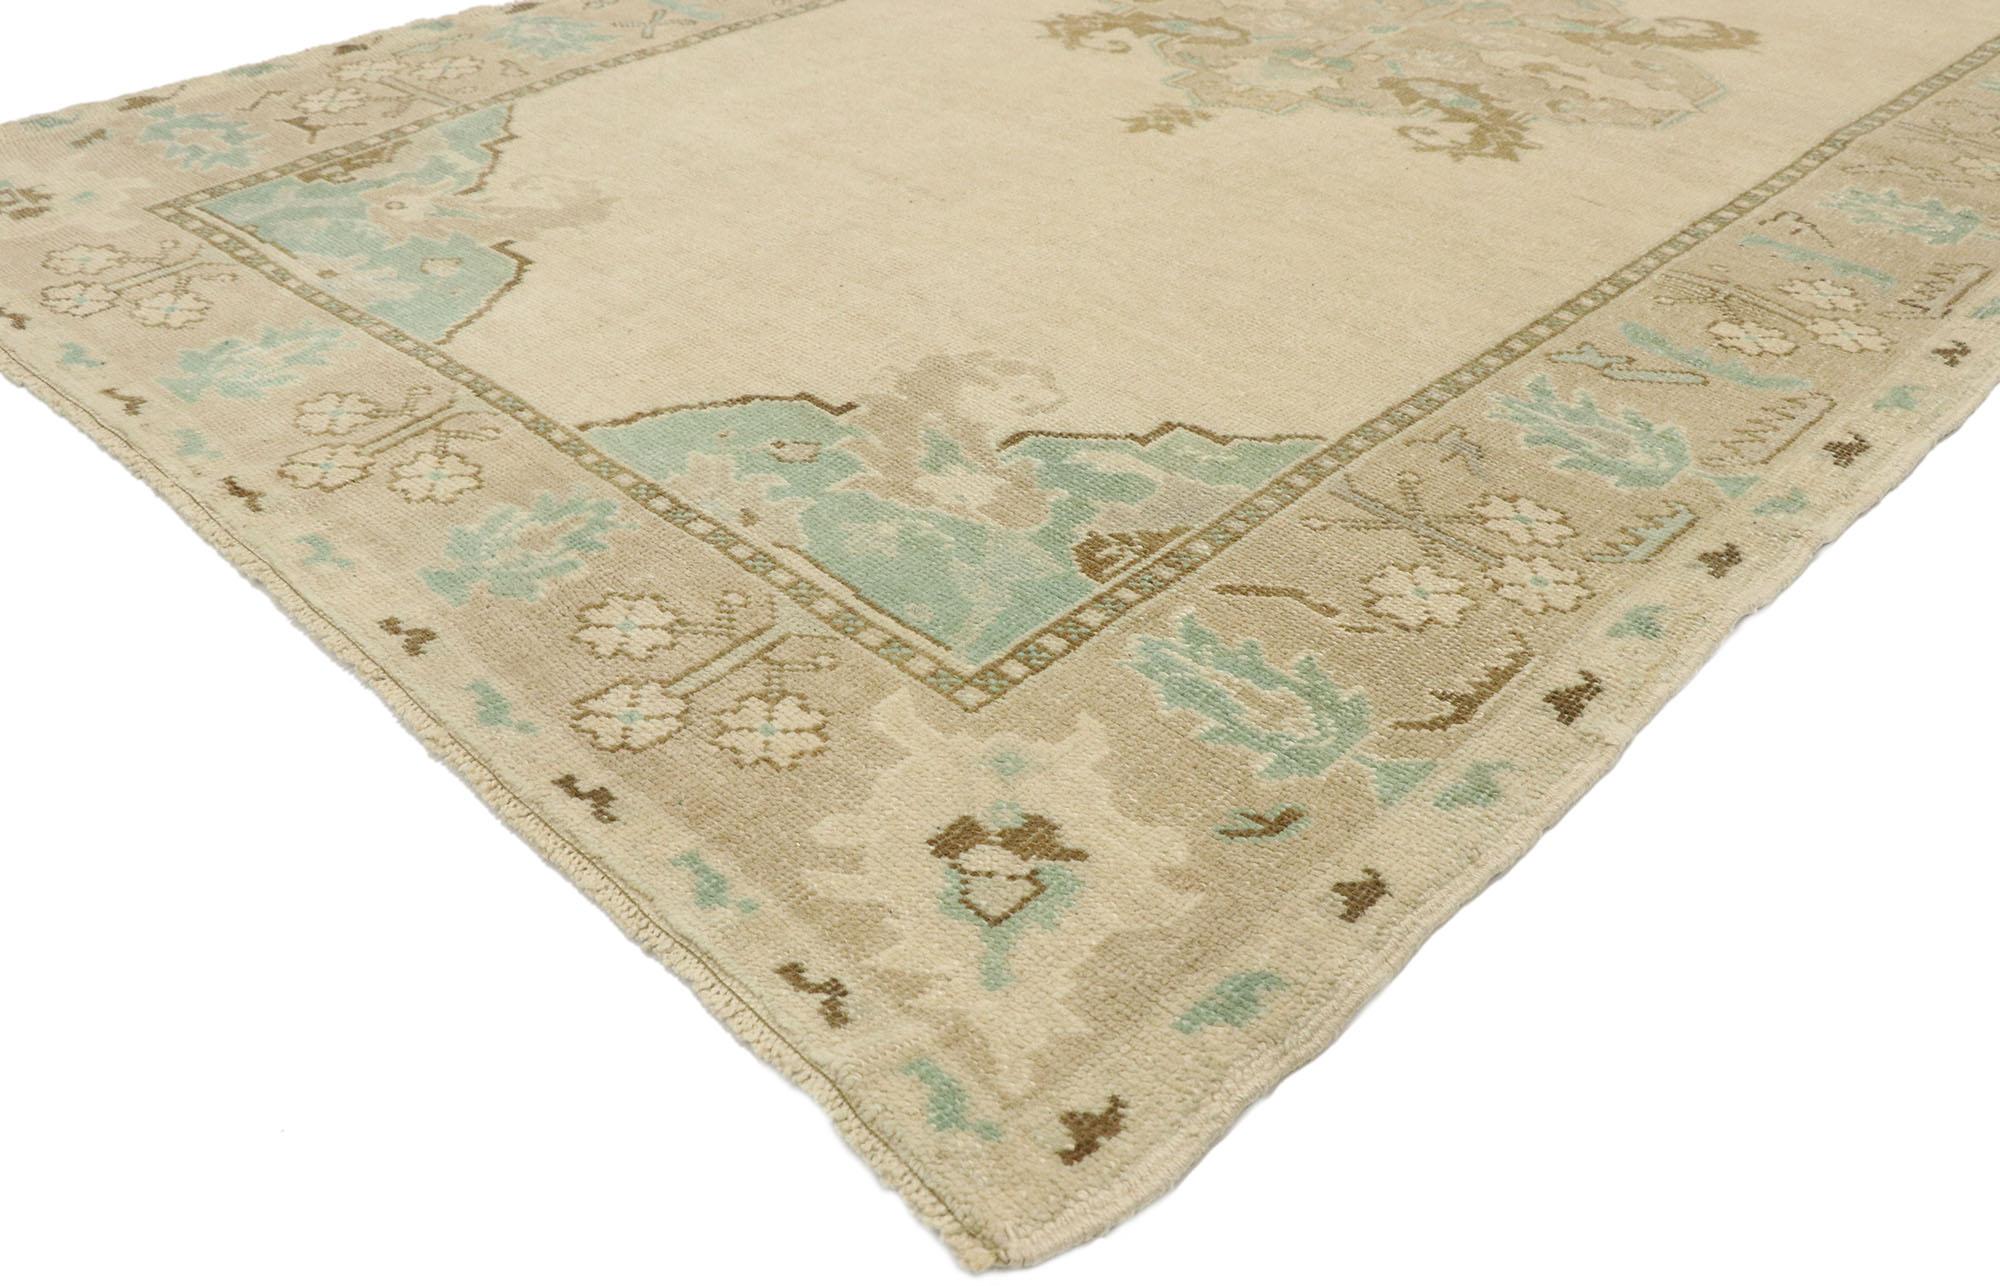 52972 vintage Turkish Oushak rug with Romantic Georgian French Cottage style. Showcasing effortless beauty and soft, bespoke vibes, this hand knotted wool vintage Turkish Oushak rug beautifully embodies Romantic Georgian French cottage style. The